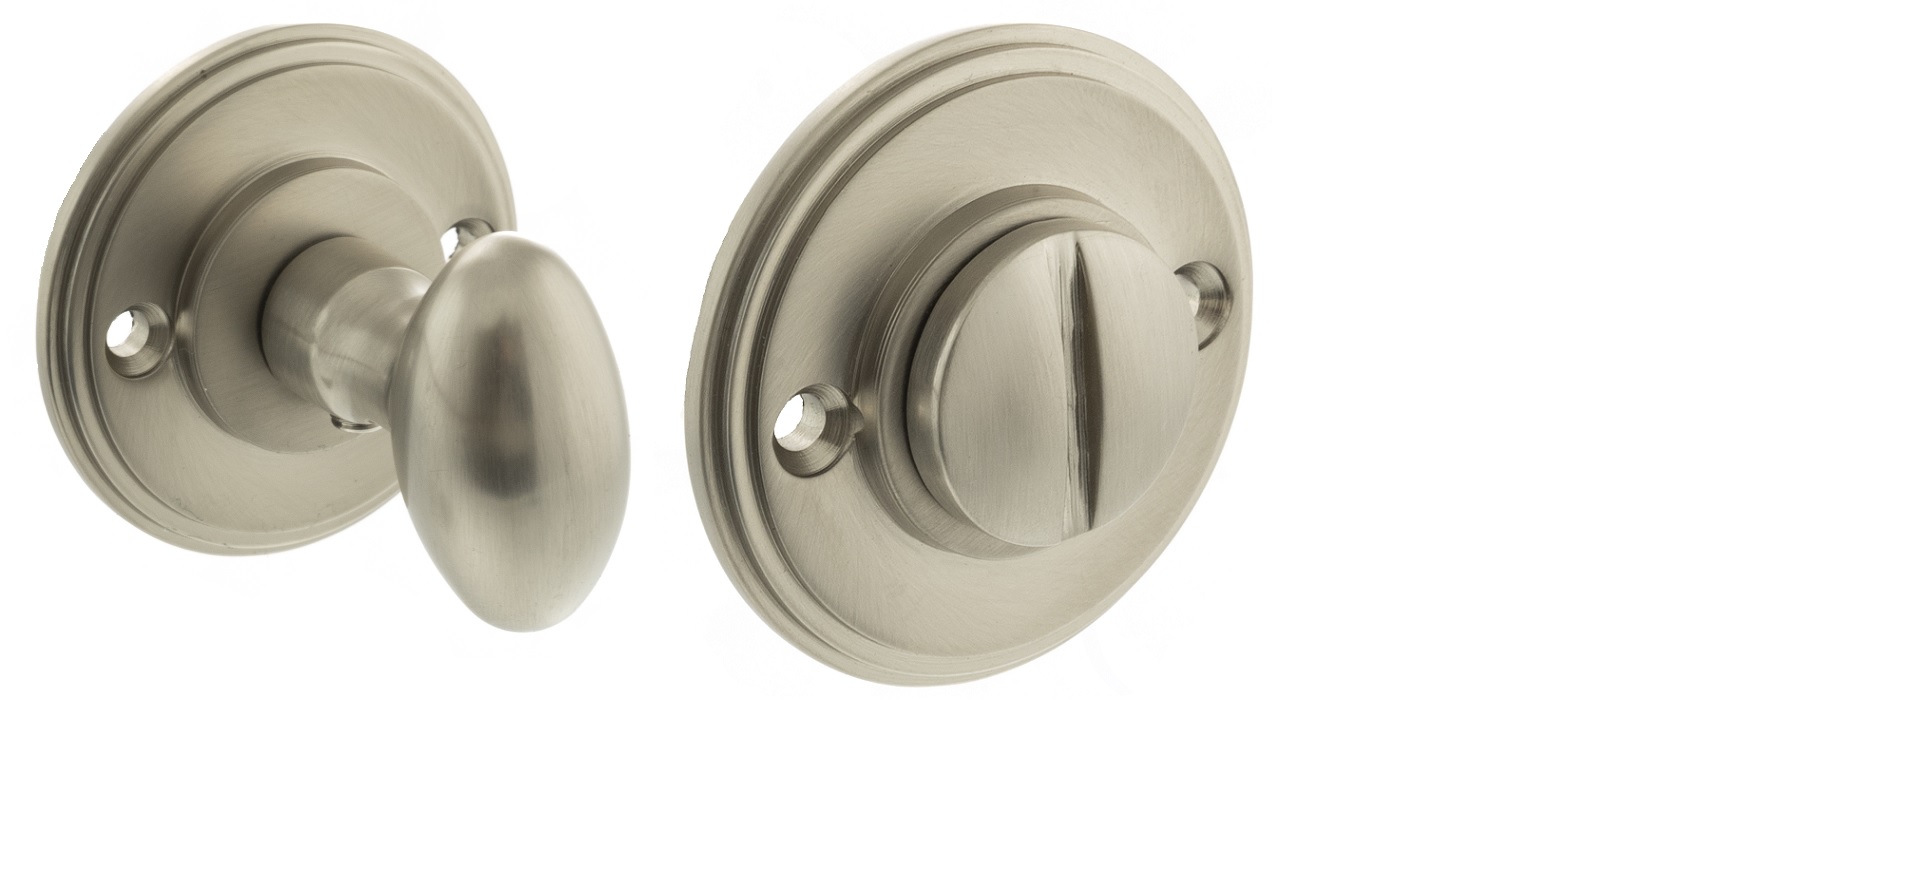 Millhouse Brass Solid Brass Oval WC Turn and Release - Satin Nickel MHOWCSN